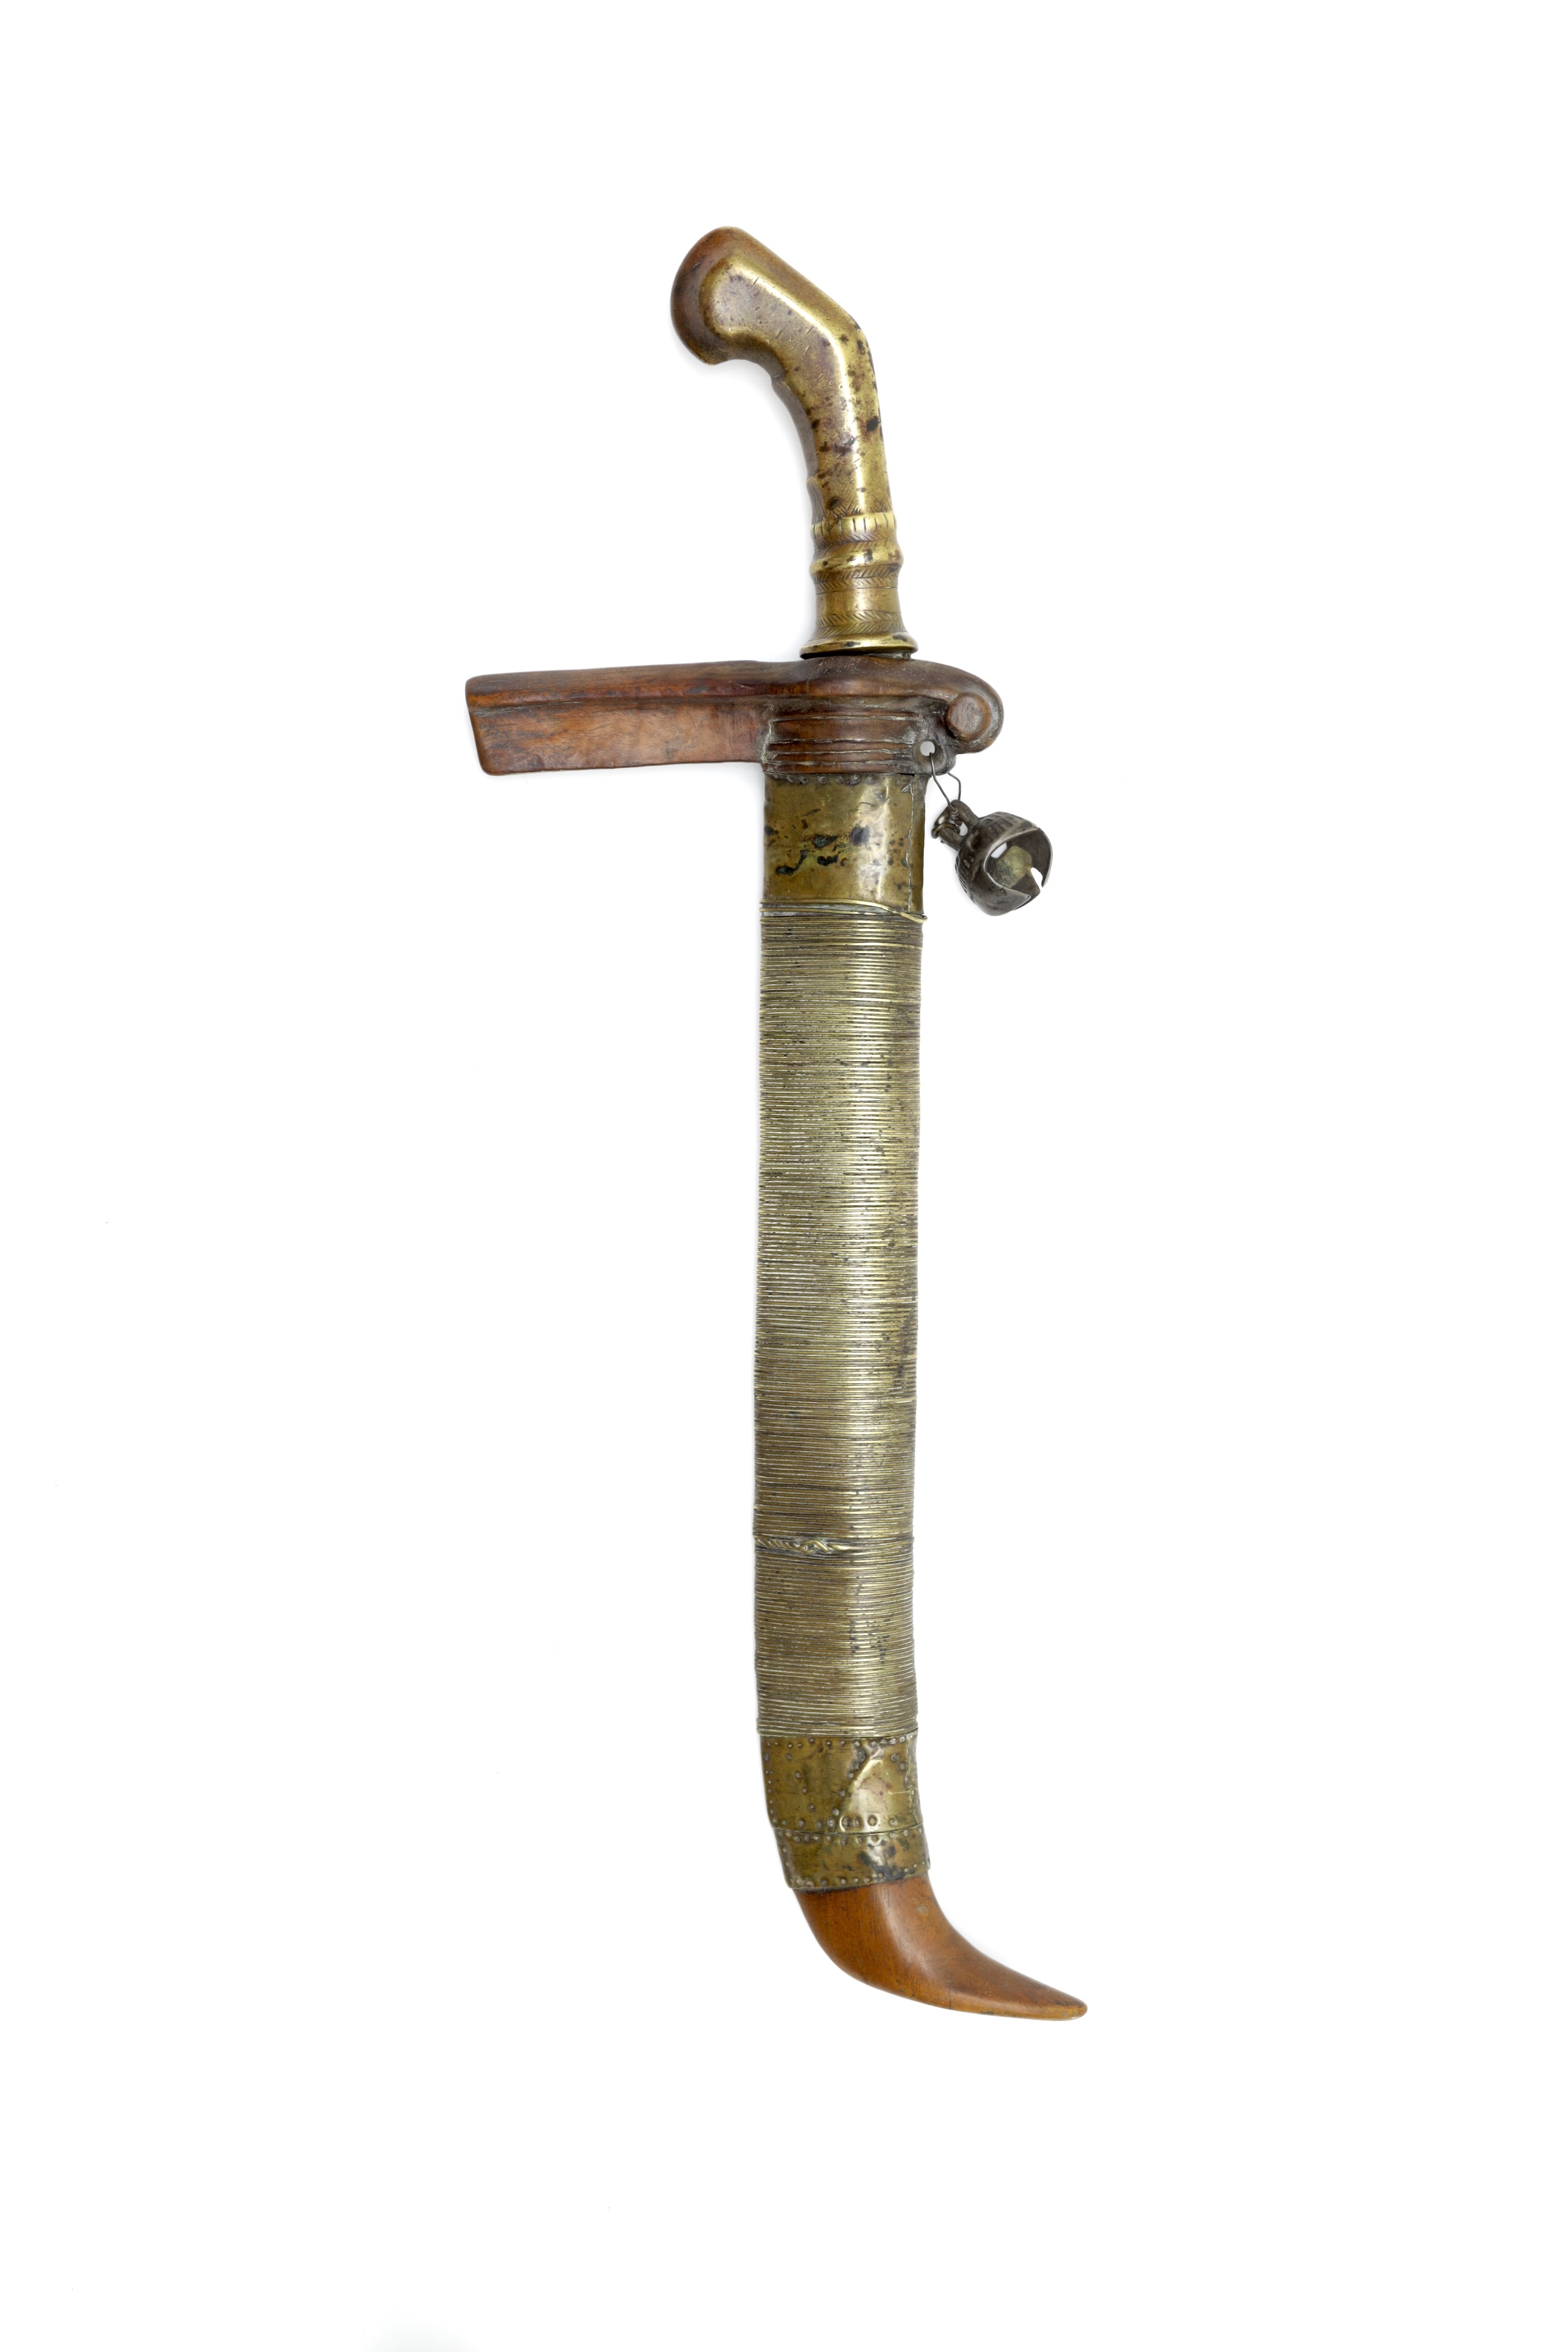 Si euli knife from North Nias